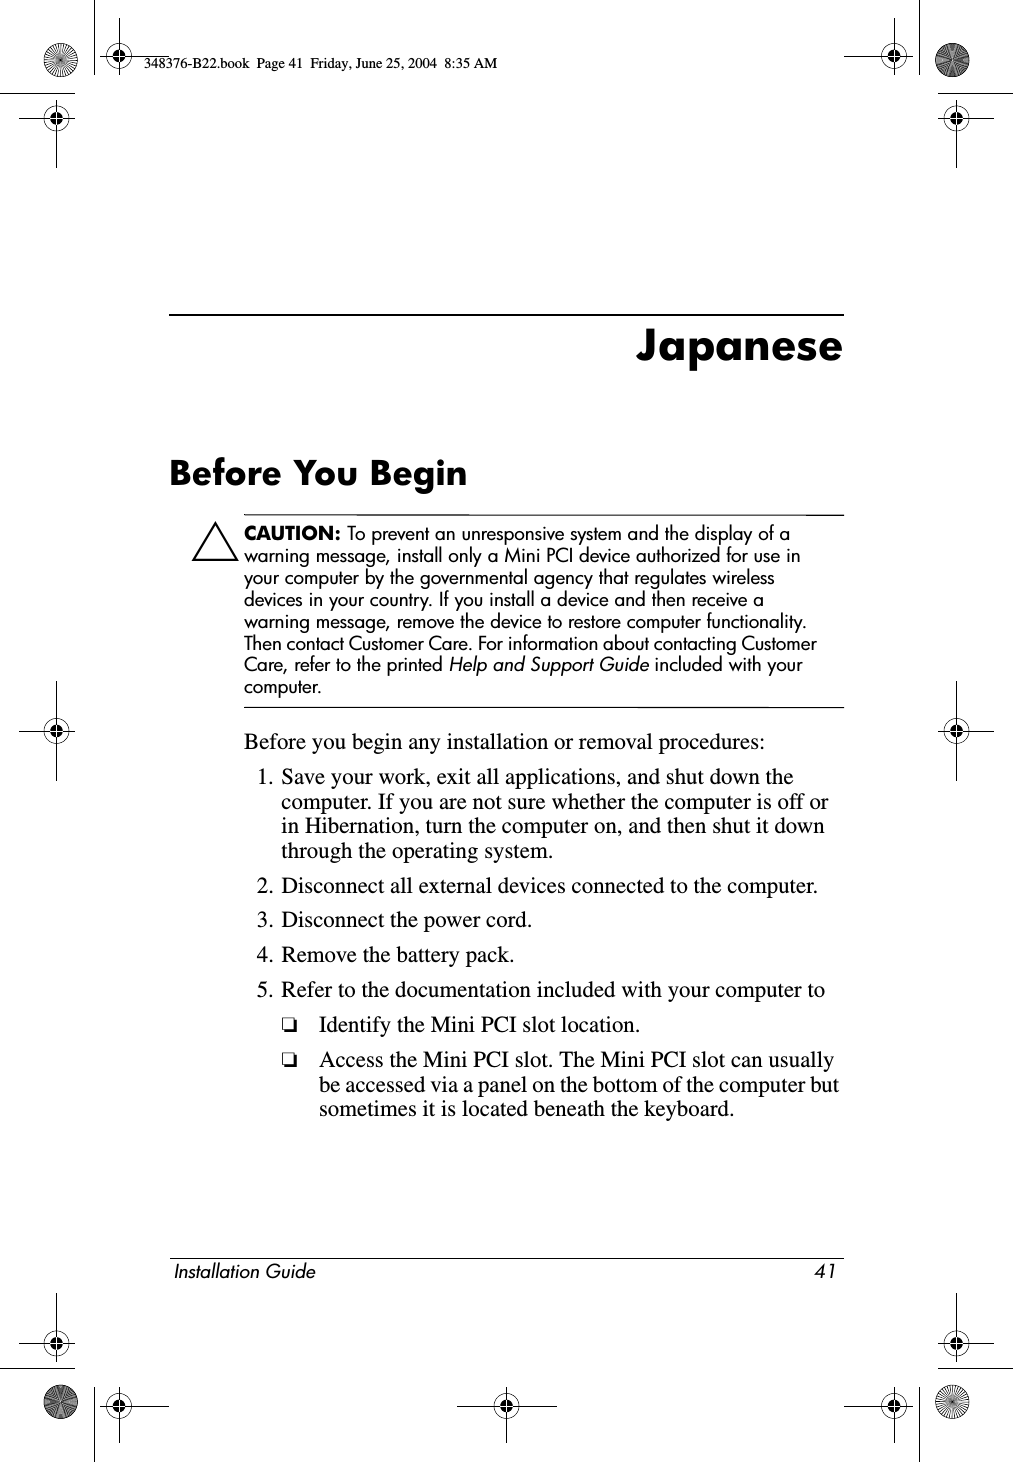 Installation Guide 41JapaneseBefore You BeginÄCAUTION: To prevent an unresponsive system and the display of a warning message, install only a Mini PCI device authorized for use in your computer by the governmental agency that regulates wireless devices in your country. If you install a device and then receive a warning message, remove the device to restore computer functionality. Then contact Customer Care. For information about contacting Customer Care, refer to the printed Help and Support Guide included with your computer.Before you begin any installation or removal procedures:1. Save your work, exit all applications, and shut down the computer. If you are not sure whether the computer is off or in Hibernation, turn the computer on, and then shut it down through the operating system.2. Disconnect all external devices connected to the computer.3. Disconnect the power cord.4. Remove the battery pack.5. Refer to the documentation included with your computer to❏Identify the Mini PCI slot location.❏Access the Mini PCI slot. The Mini PCI slot can usually be accessed via a panel on the bottom of the computer but sometimes it is located beneath the keyboard.348376-B22.book  Page 41  Friday, June 25, 2004  8:35 AM